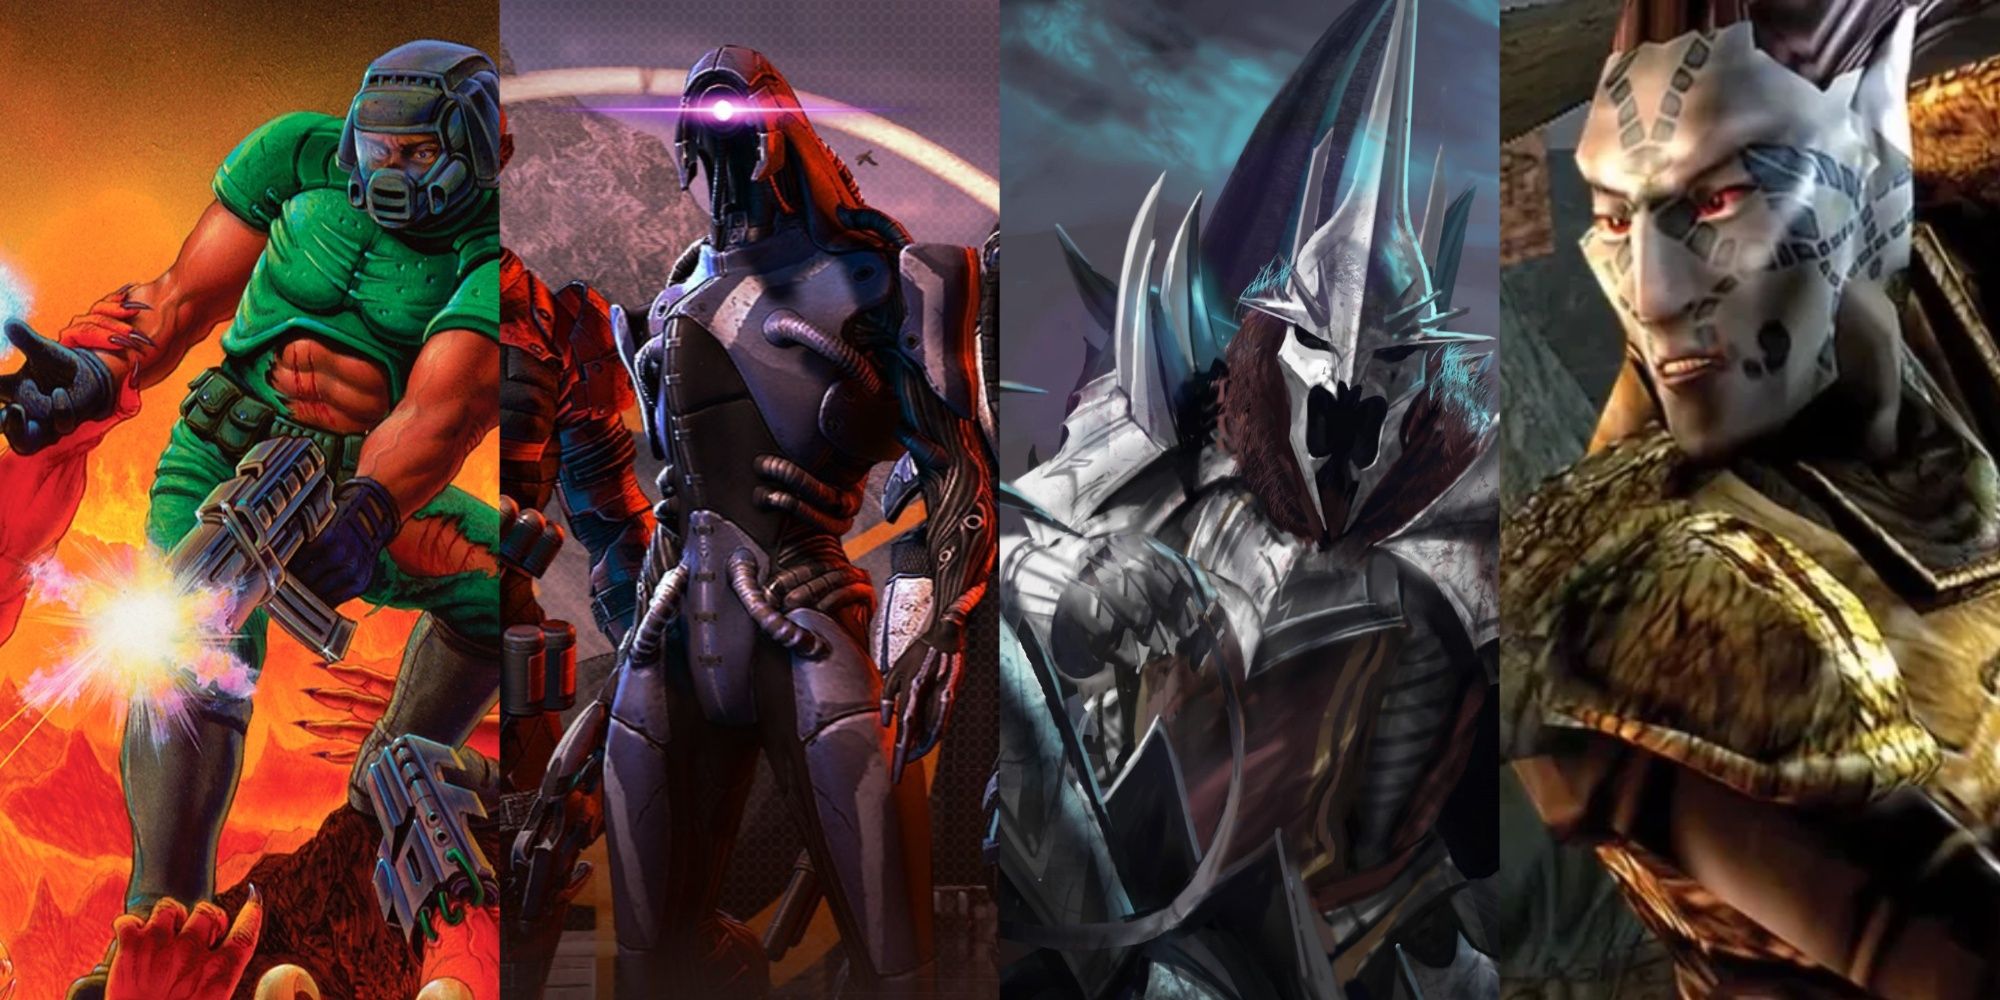 Collage of Doom, Mass Effect 3, Rise of the Witchking and Morrowind